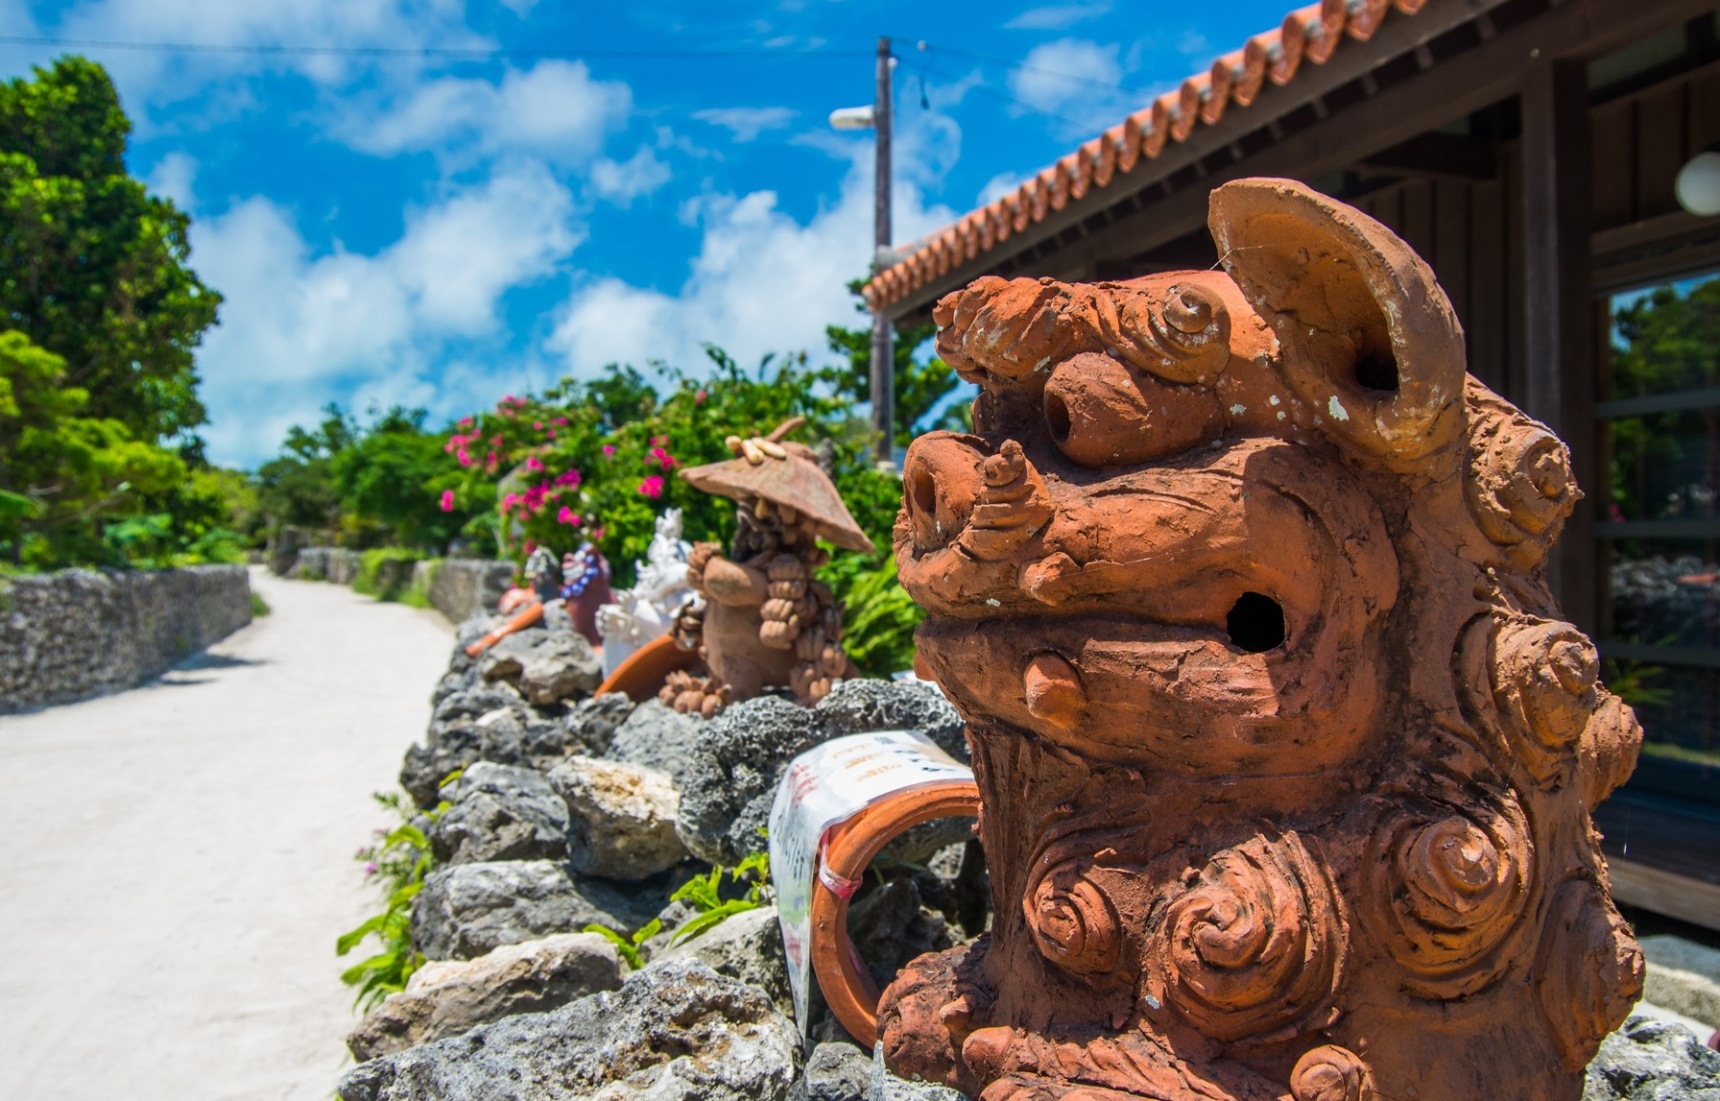 8 Places To Visit On Okinawa's Main Island